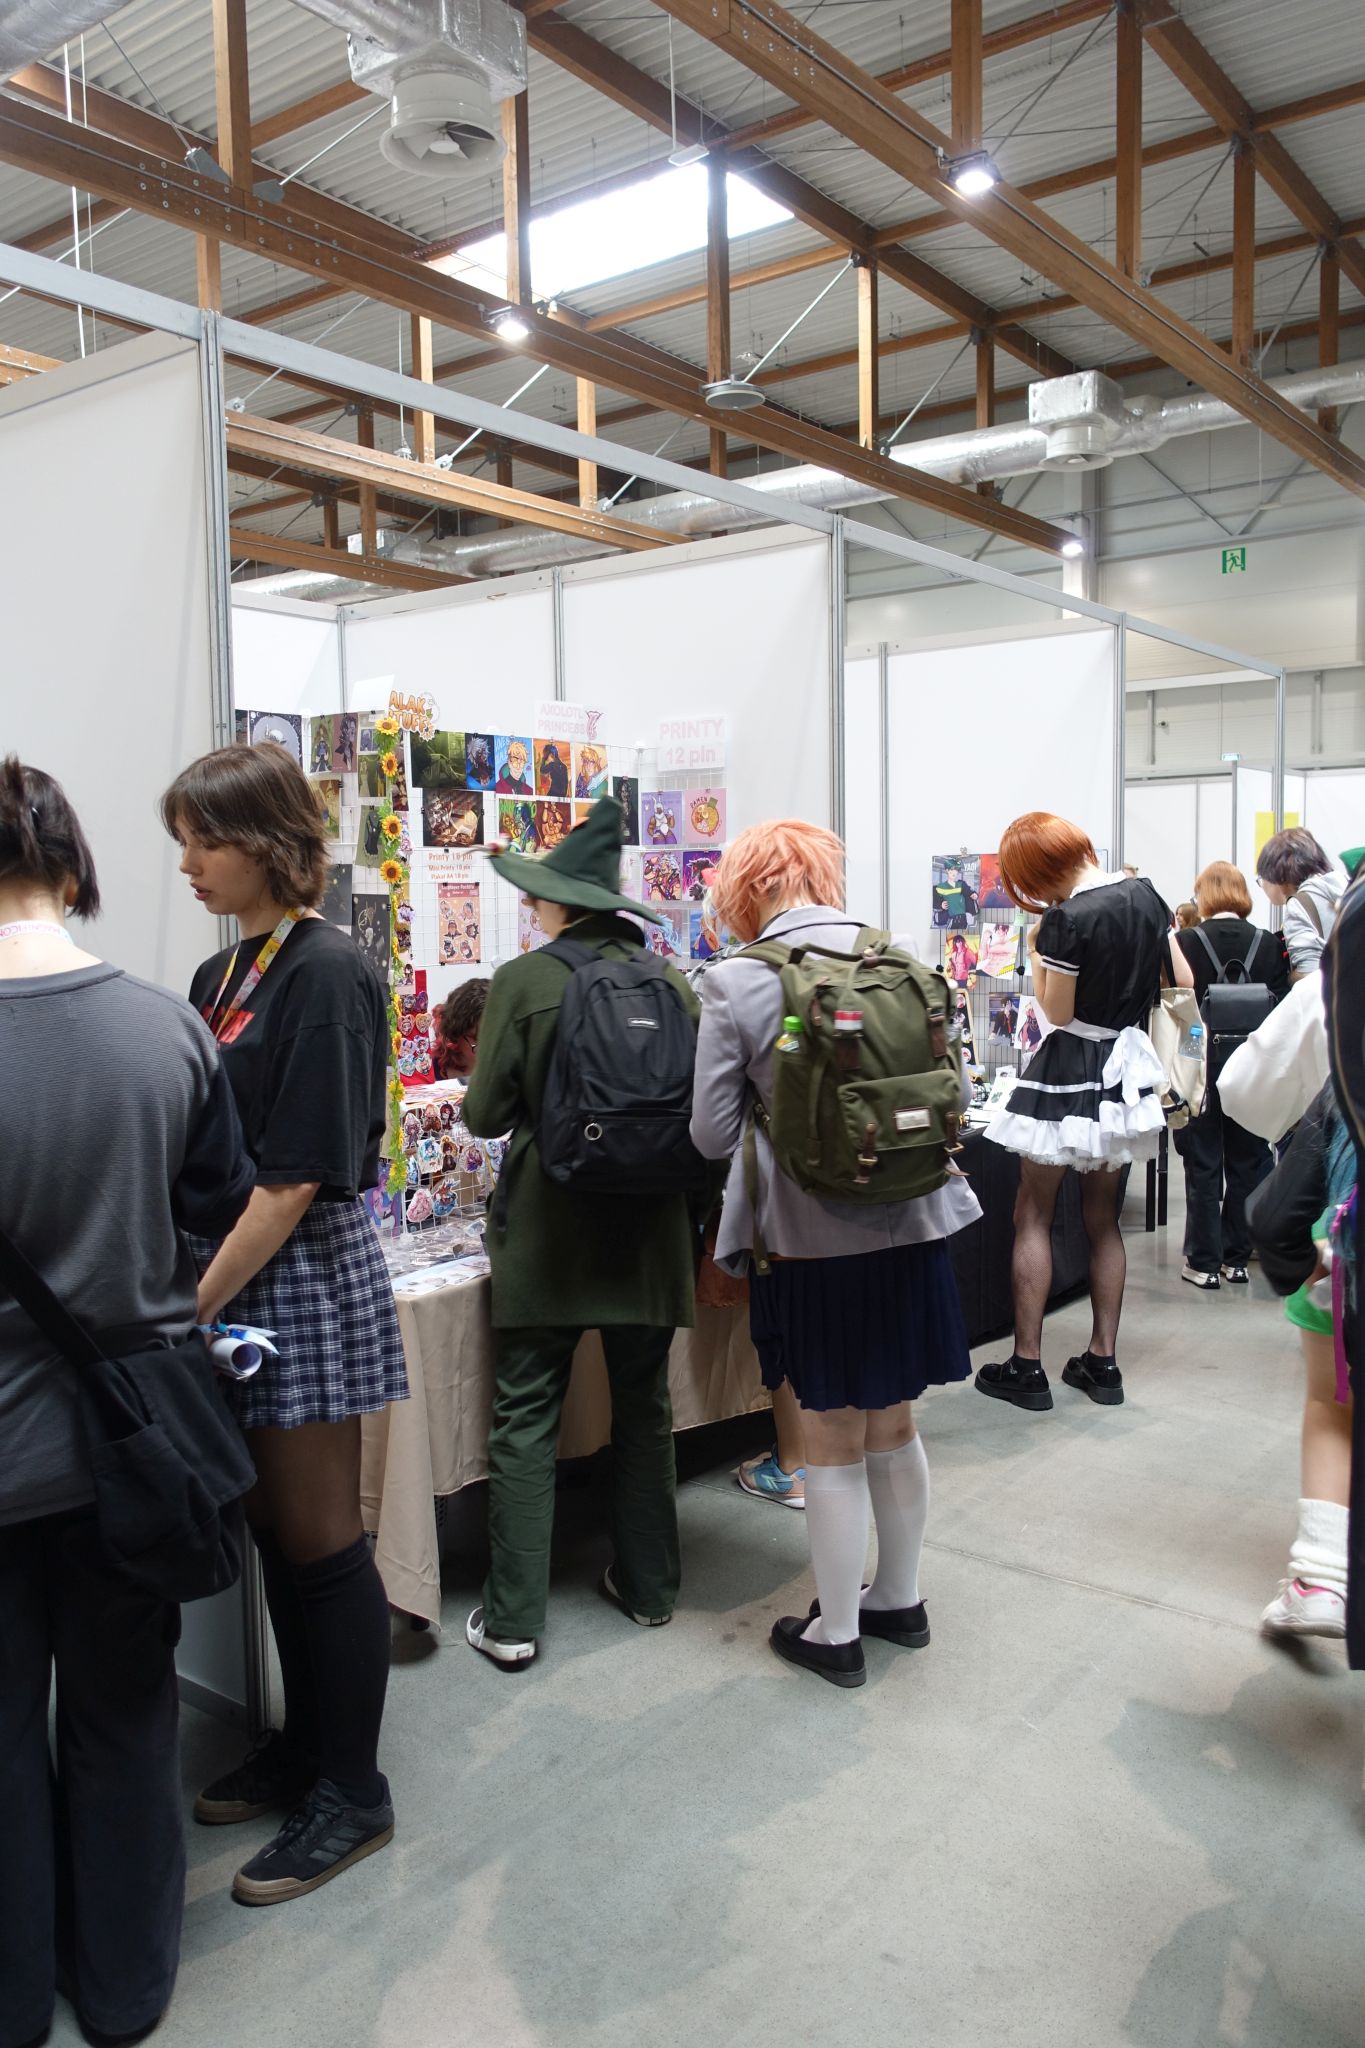 A few booths in the hall. In the center there is a person in the Snufkin costume. More people are standing in front of the booths.